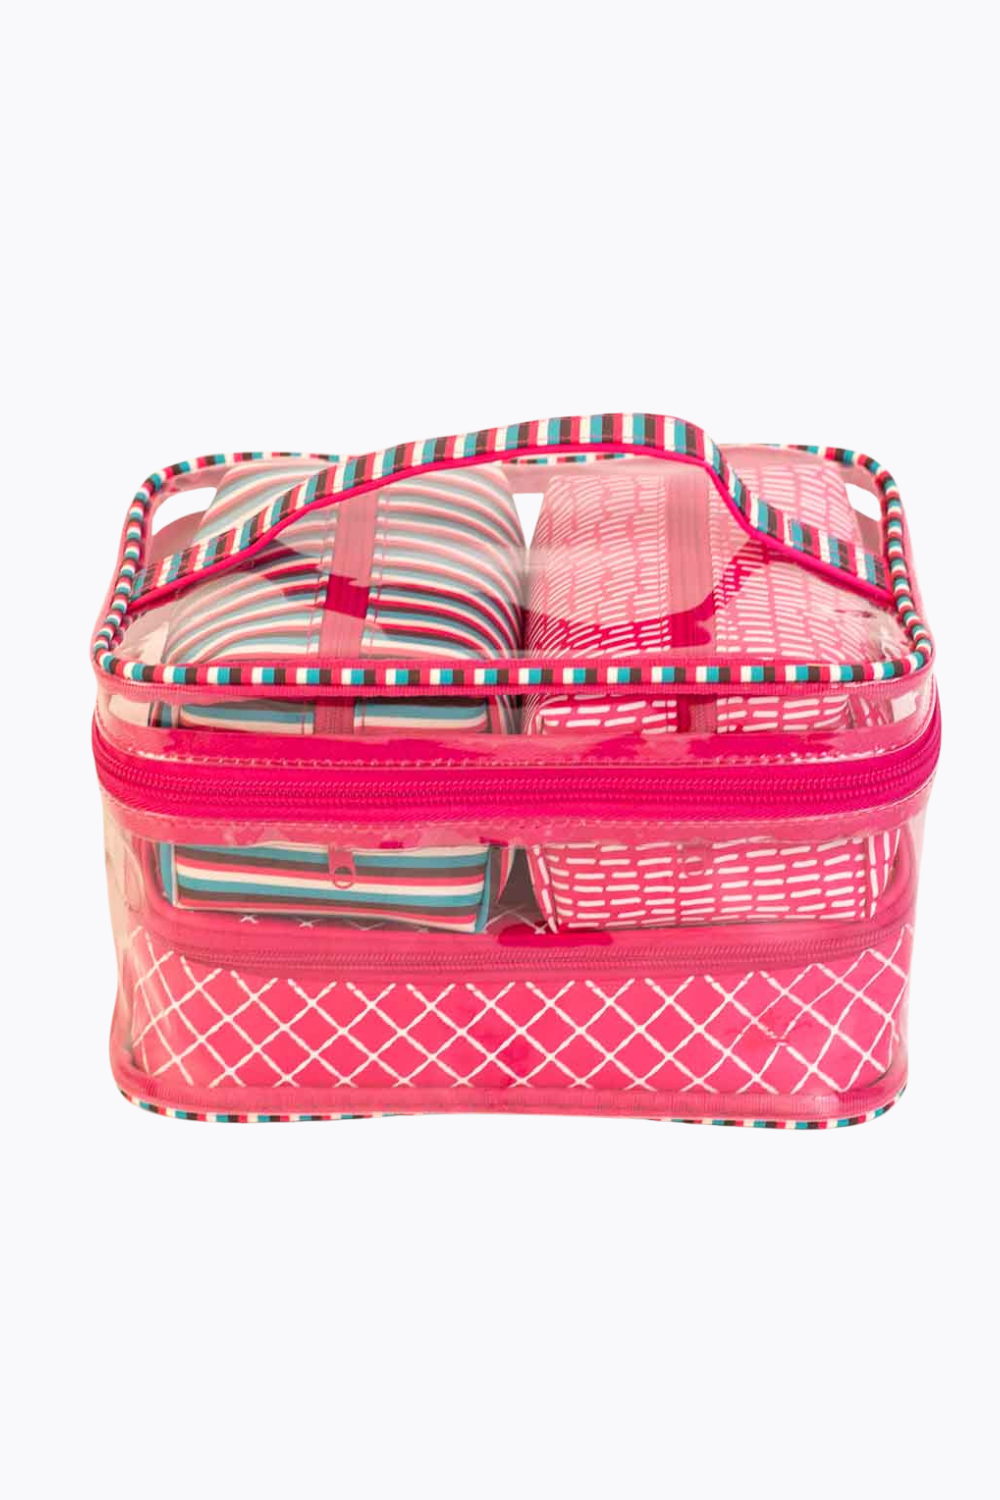 Wanderlust Gift Set in Hot Pink/Turquoise